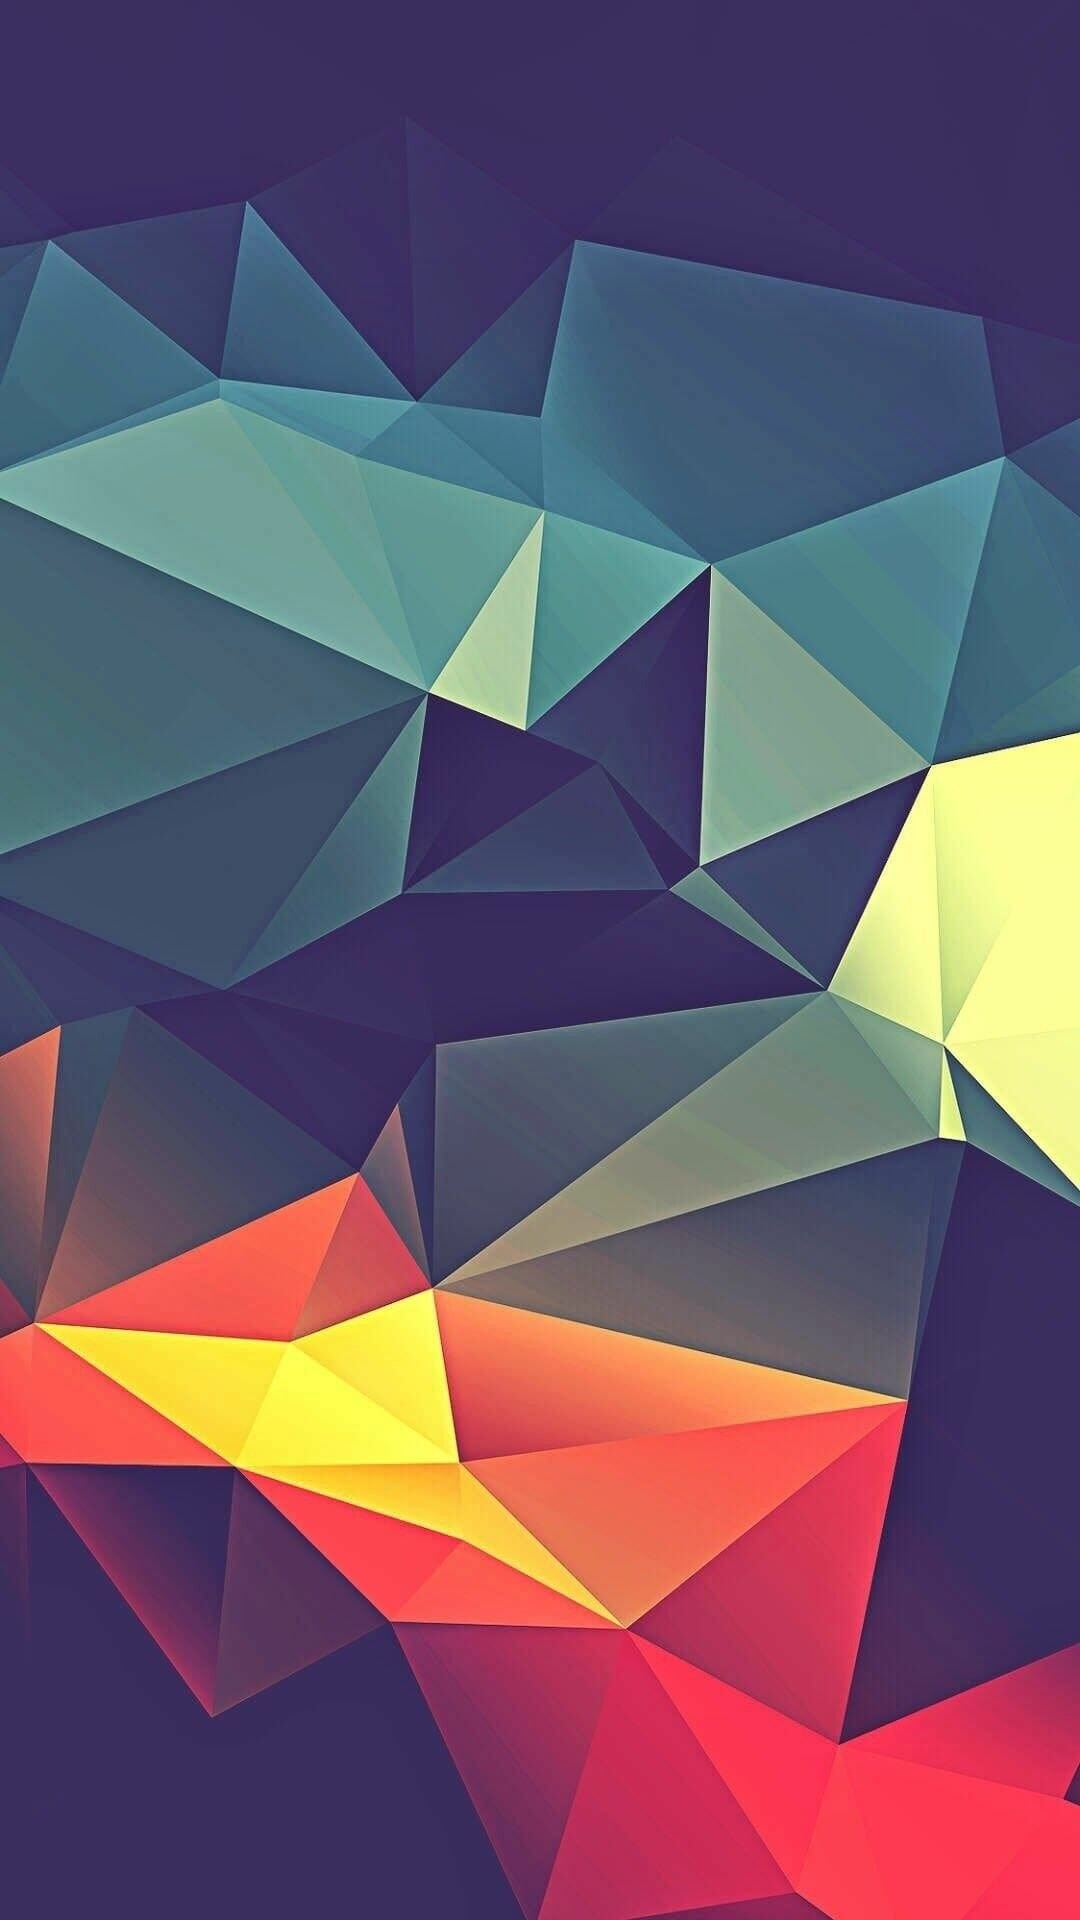 Geometric Abstract: Triangles, Pyramids, Colorful shapes, Vertex. 1080x1920 Full HD Wallpaper.